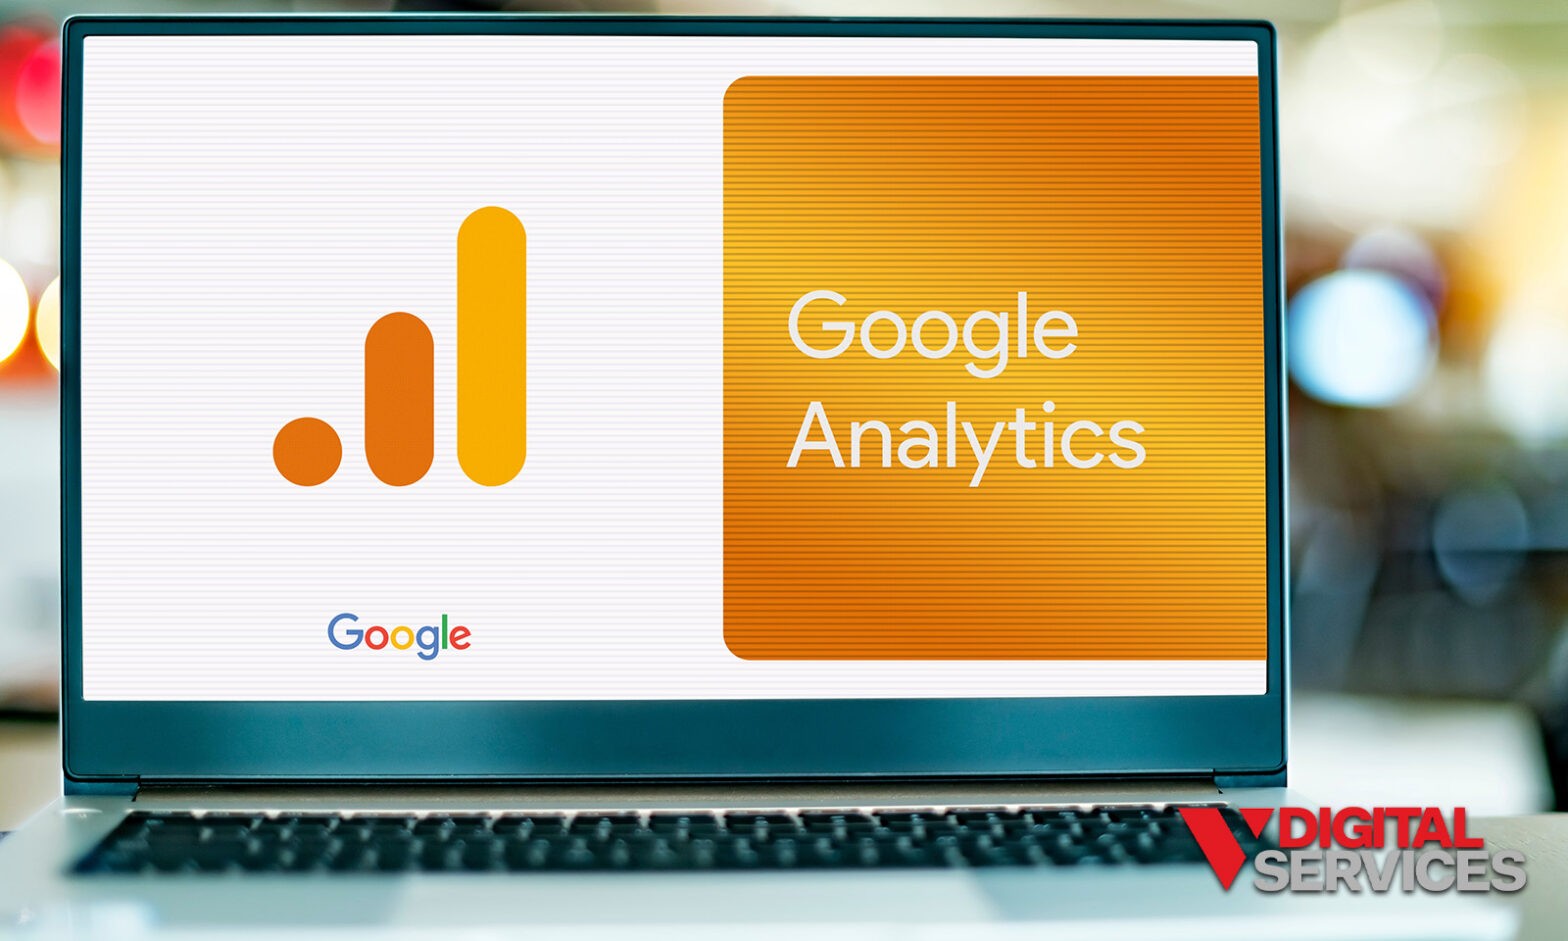 Featured image for post: What is new and better about Google Analytics 4